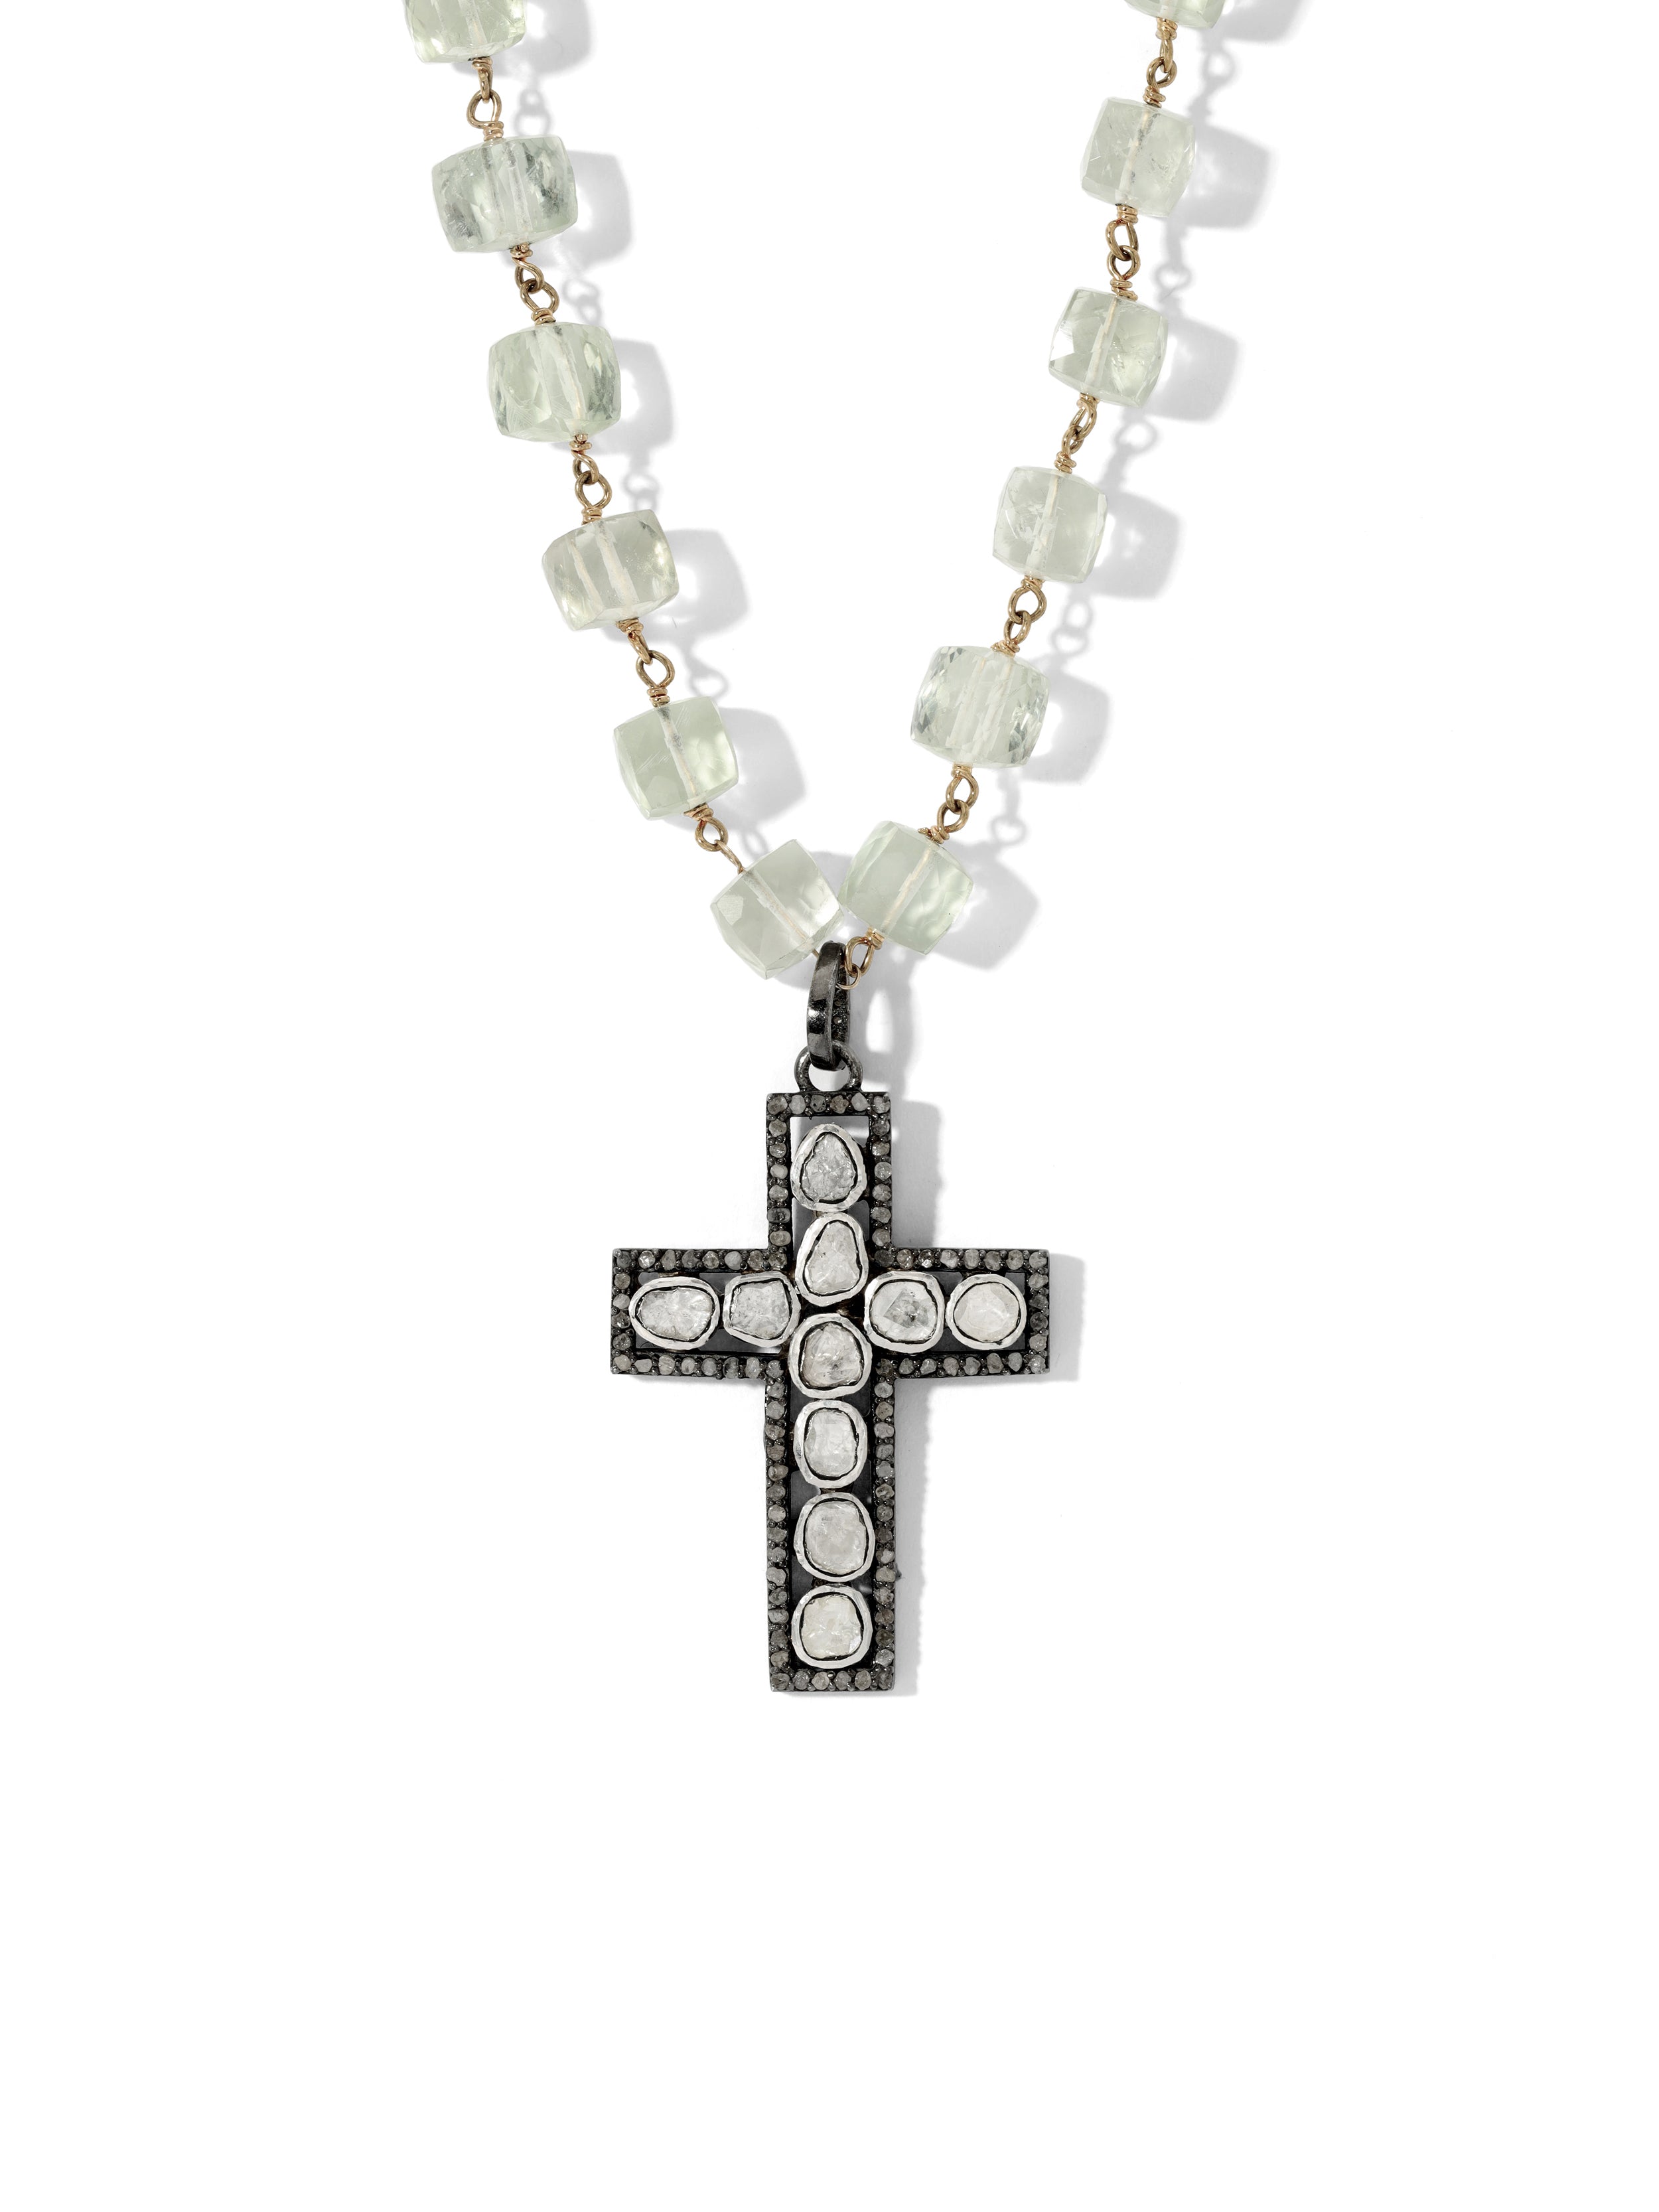 The Marilyn Cross Necklace